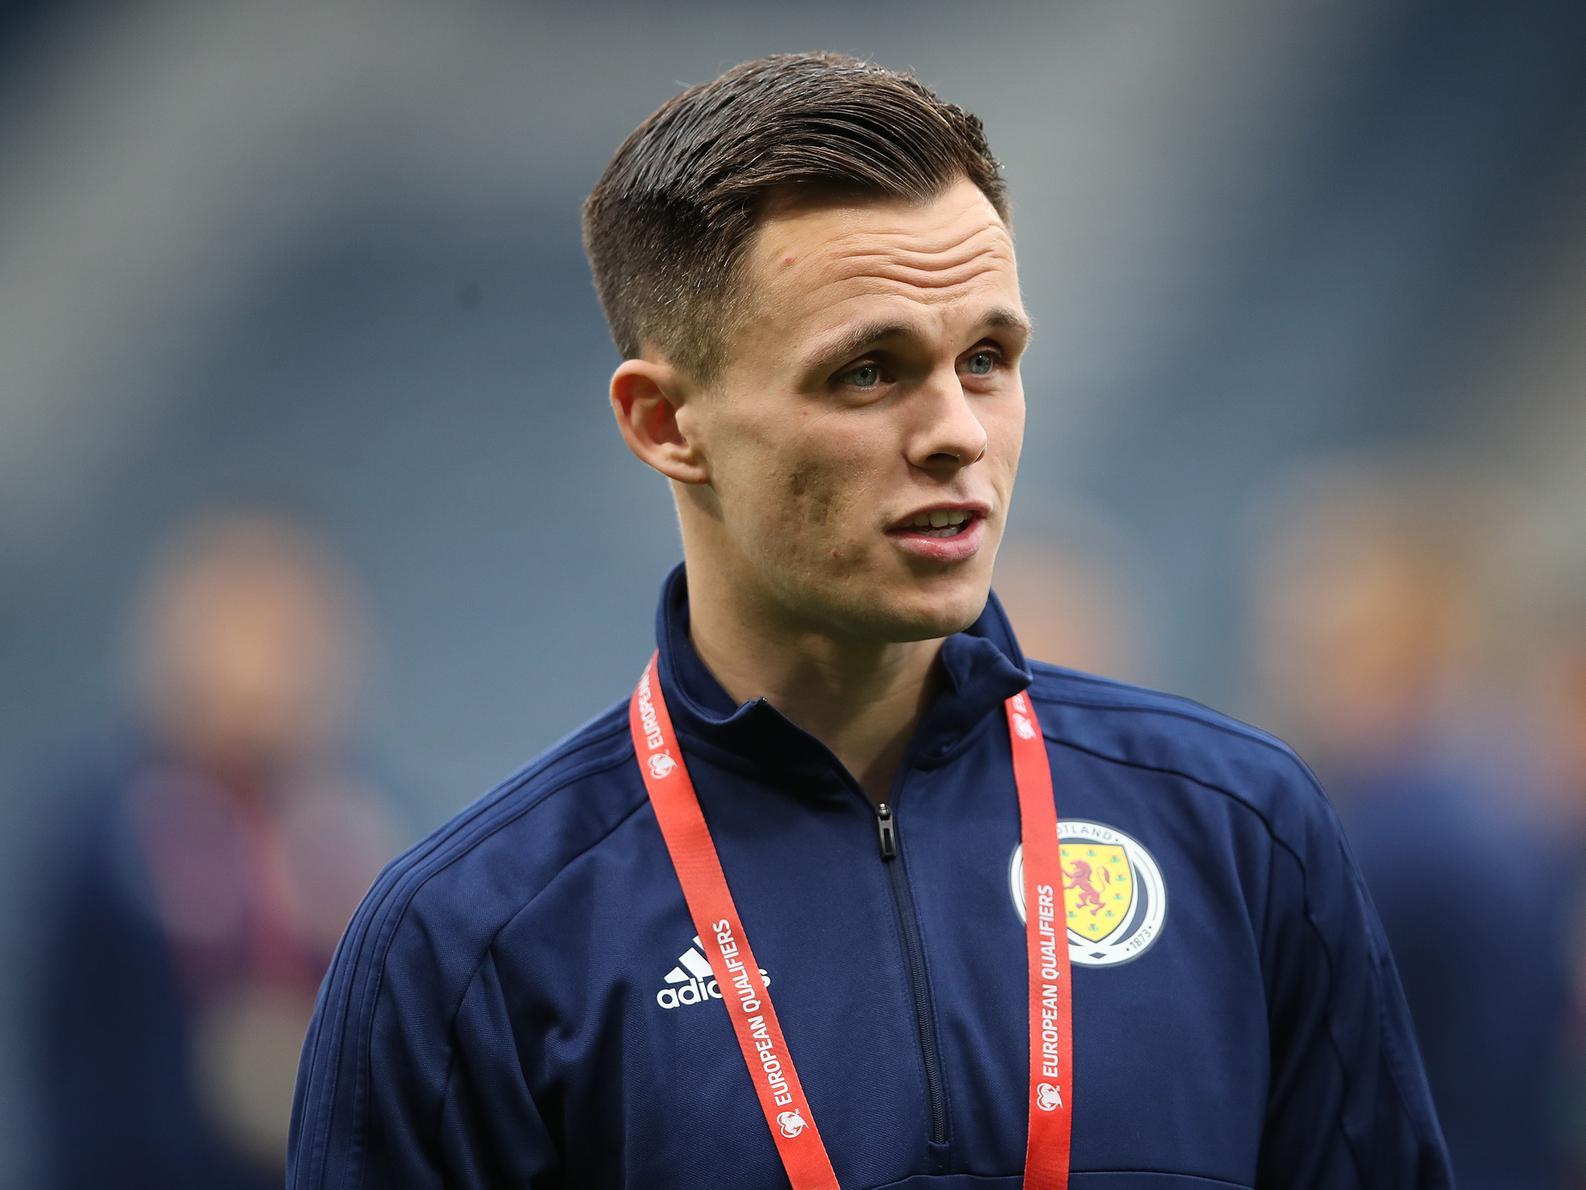 Celtic are the bookies' 2/1 favourites to sign 22-goal sensation Lawrence Shankland from Dundee United this month, with Championship side QPR currently trailing them by some distance at 6/1. (Sky Bet)